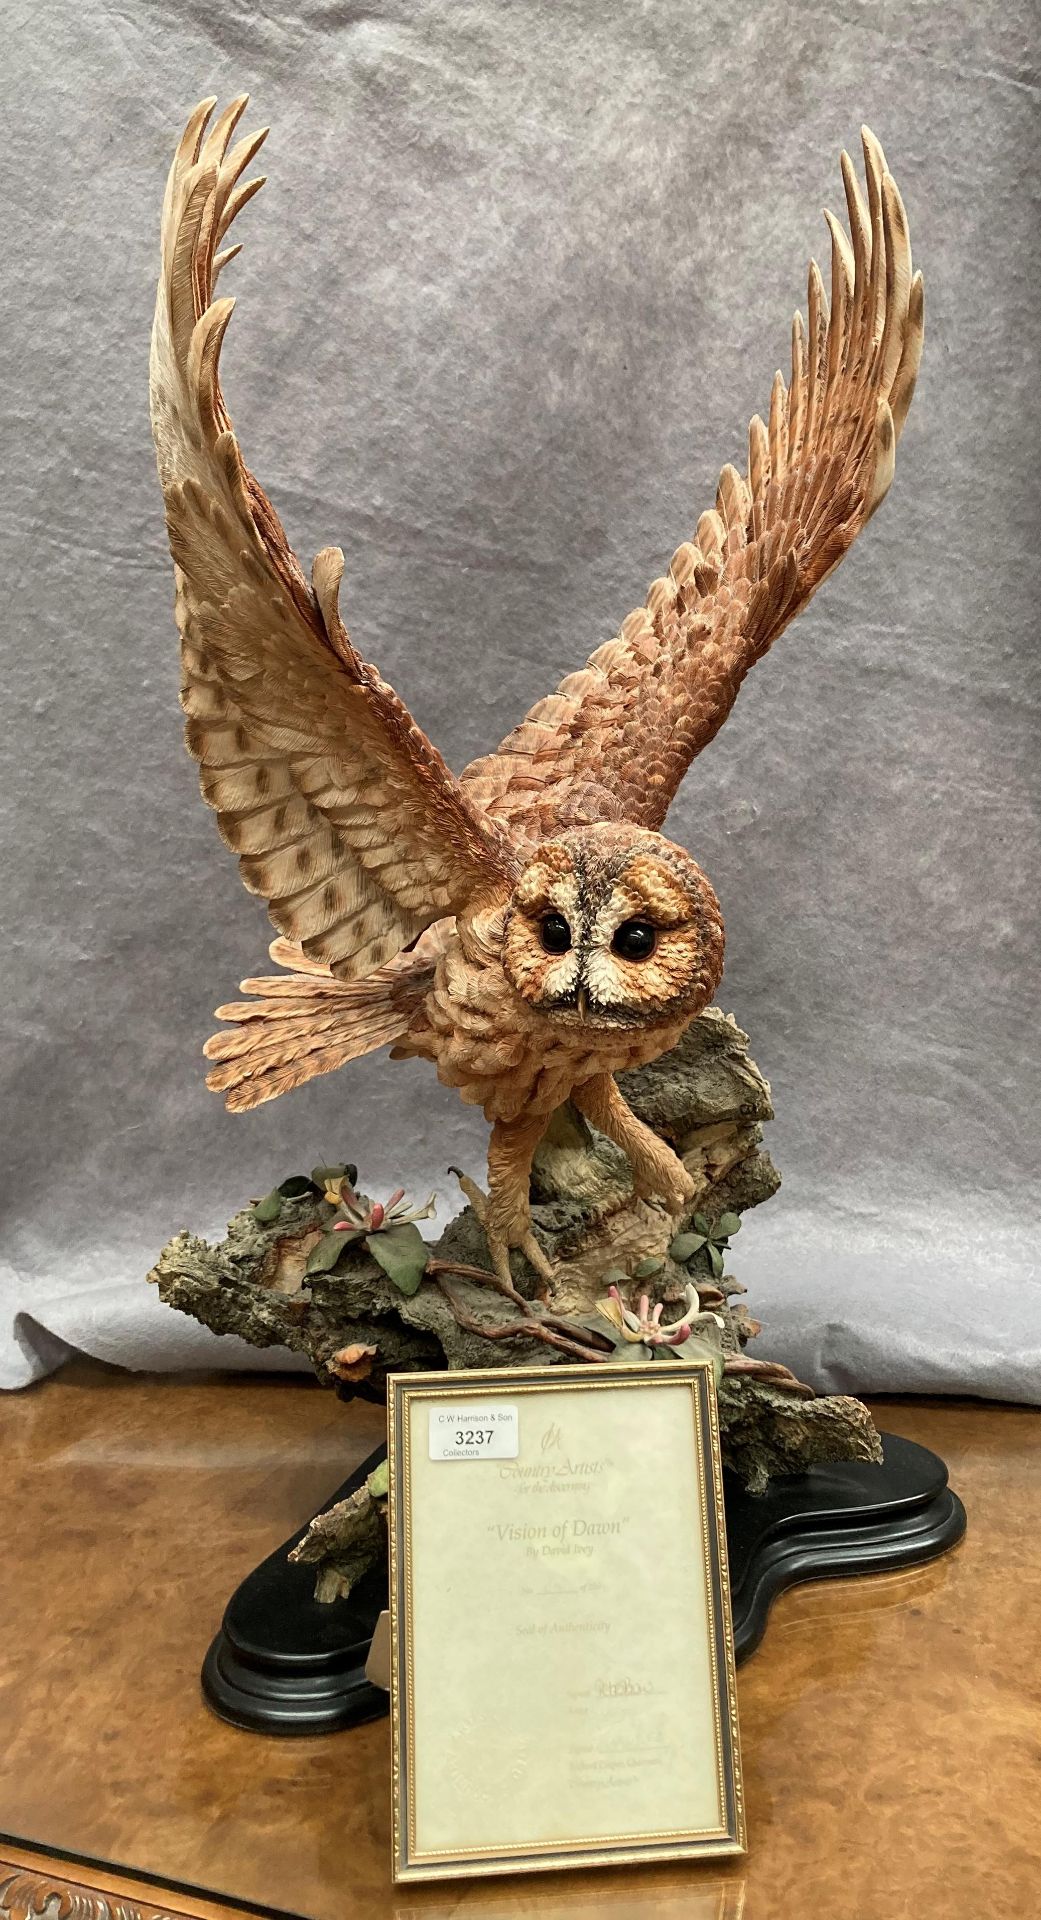 A Country Artists limited edition composition sculpture of an owl 'Vision of Dawn' by David Ivey - Image 4 of 4